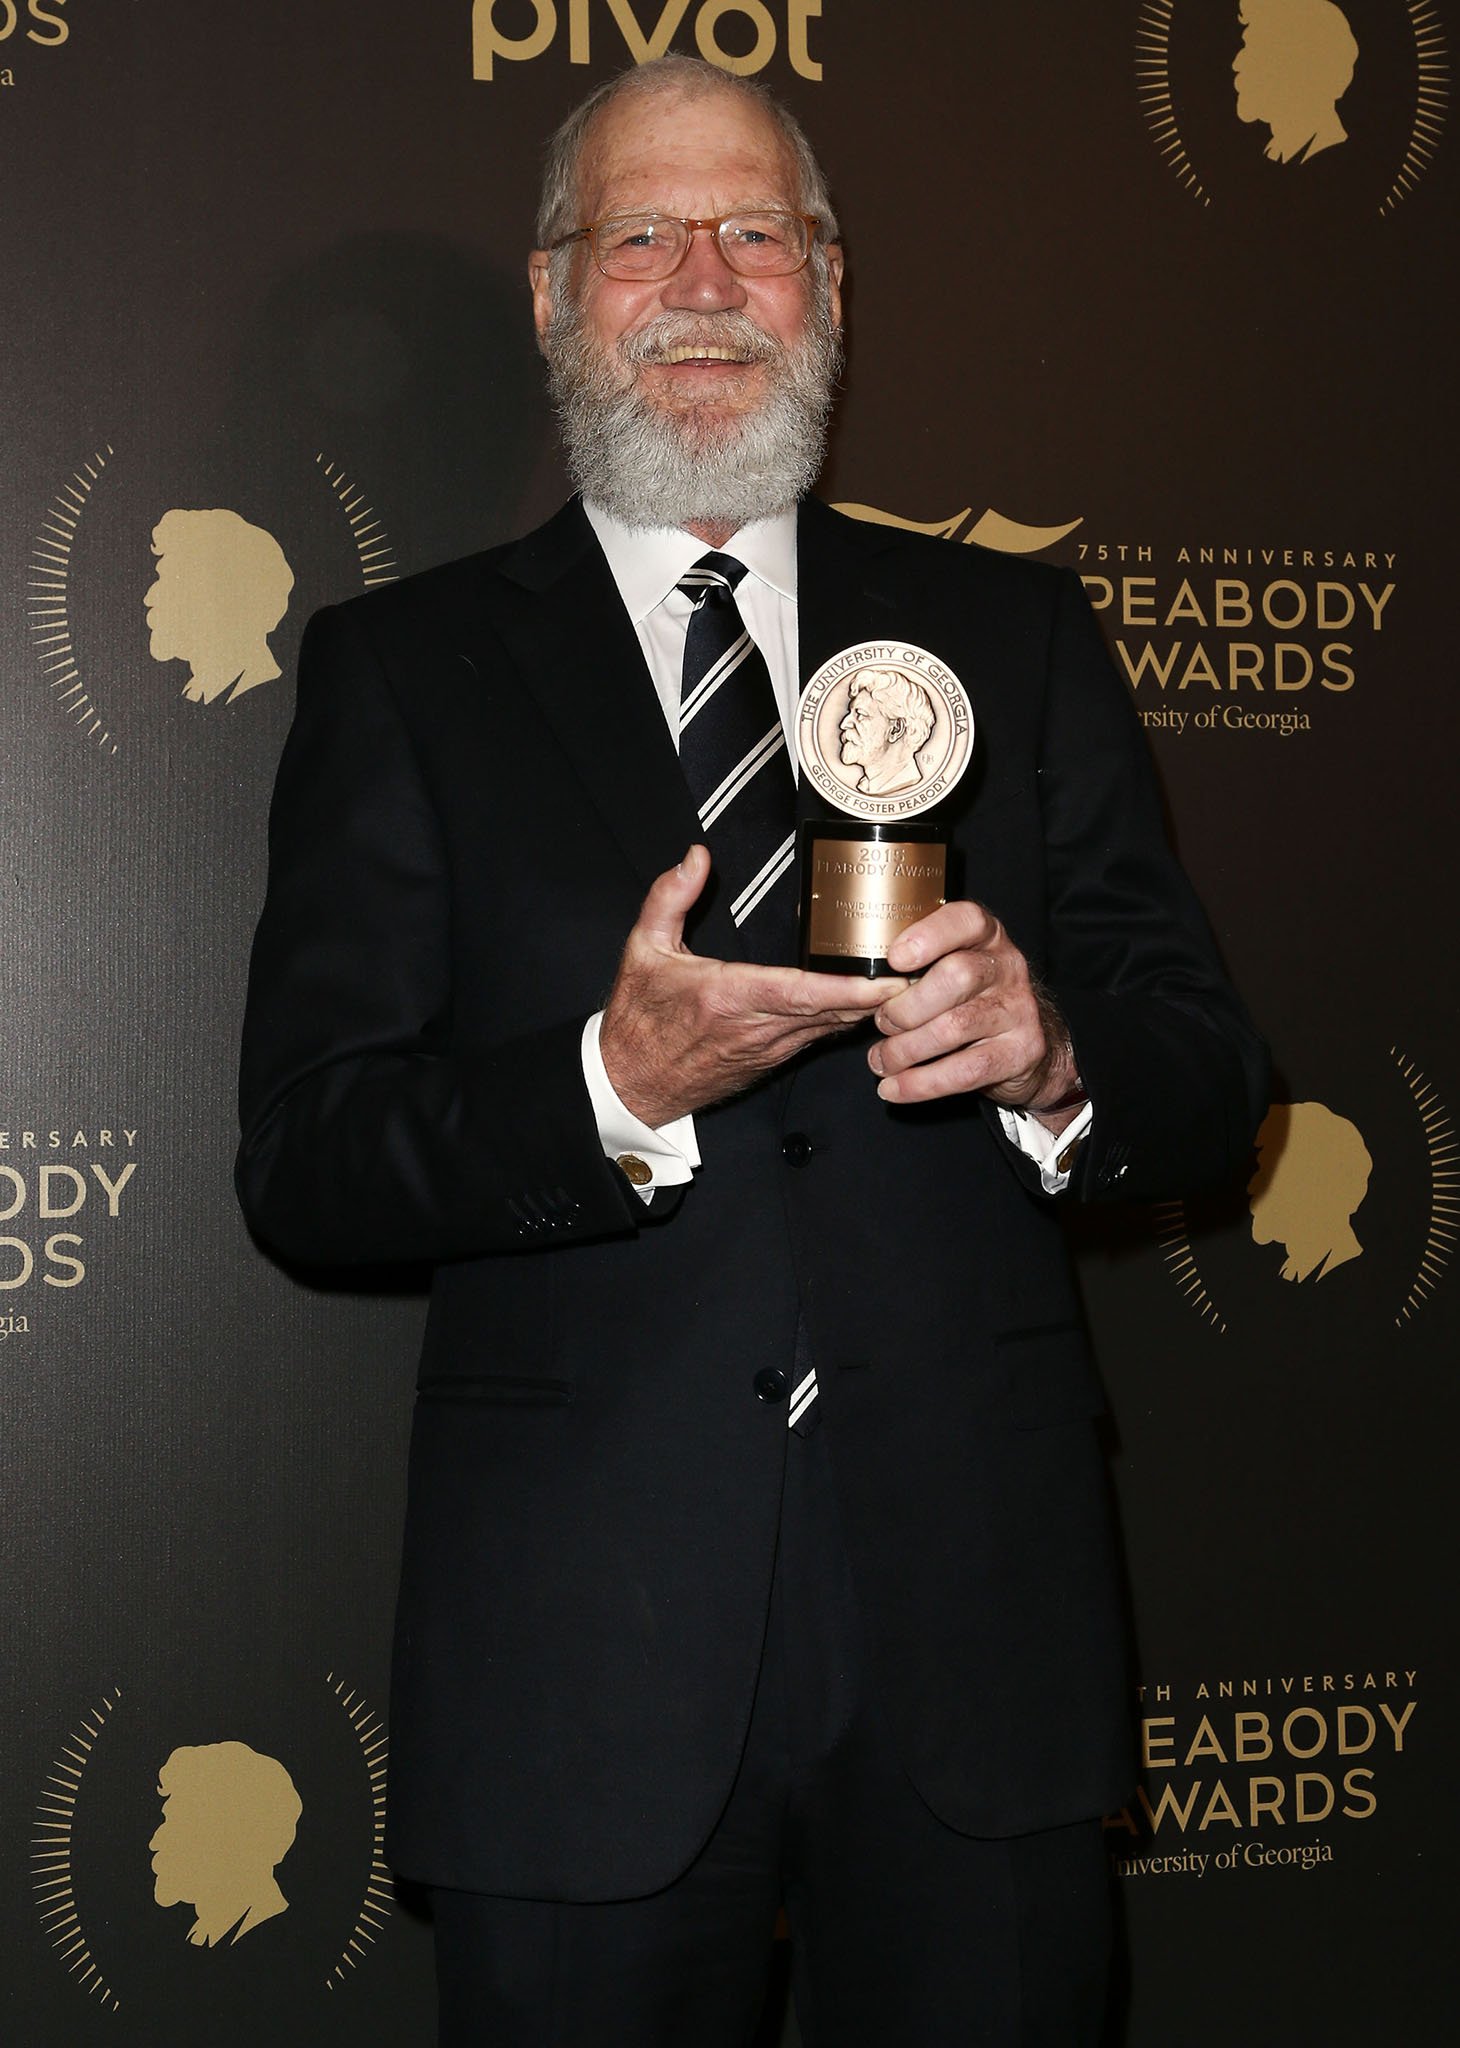 David Letterman hosted the late night television talk show Late Night with David Letterman for 33 years, from 1982 to 2015, making him the longest-serving late night talk show host in American television history